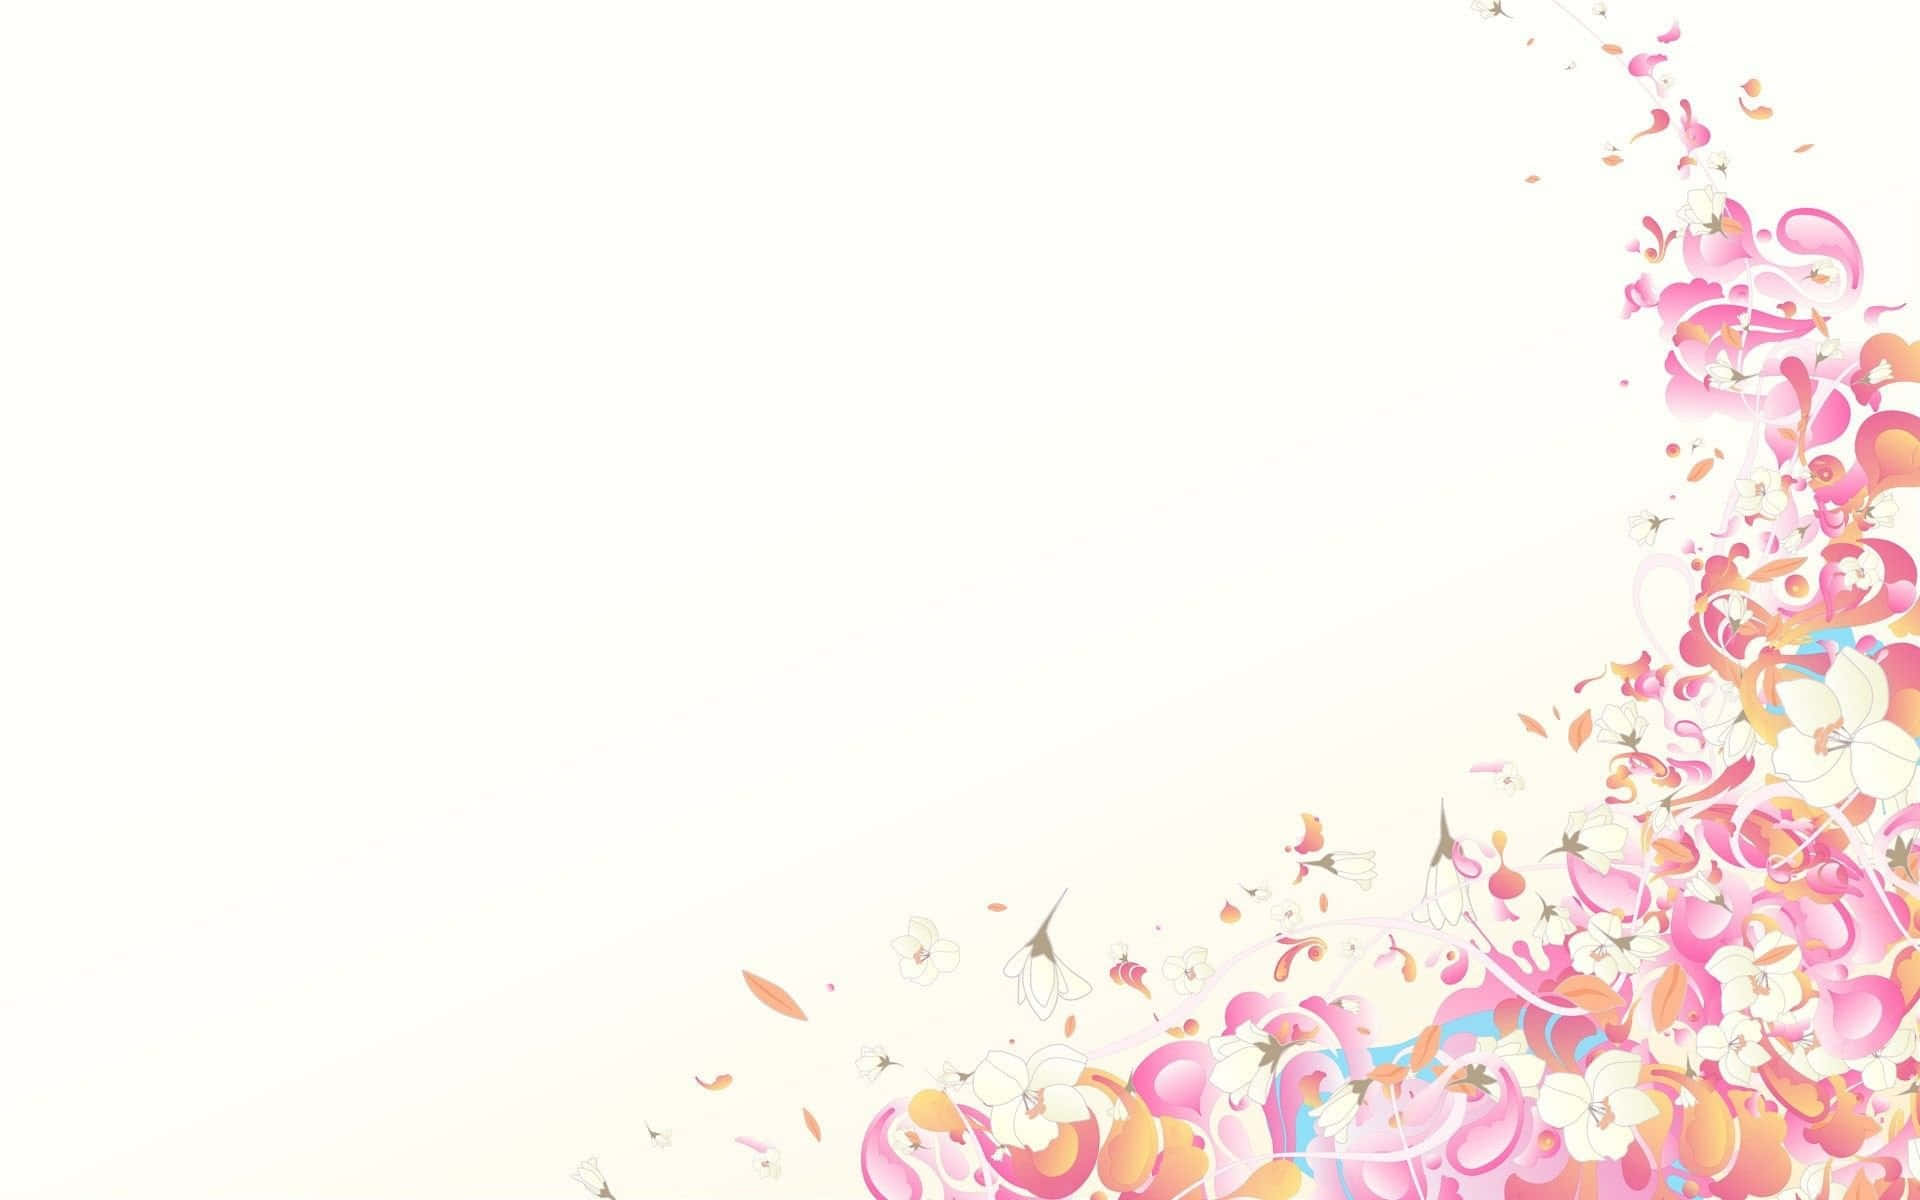 A beautiful pastel colored background